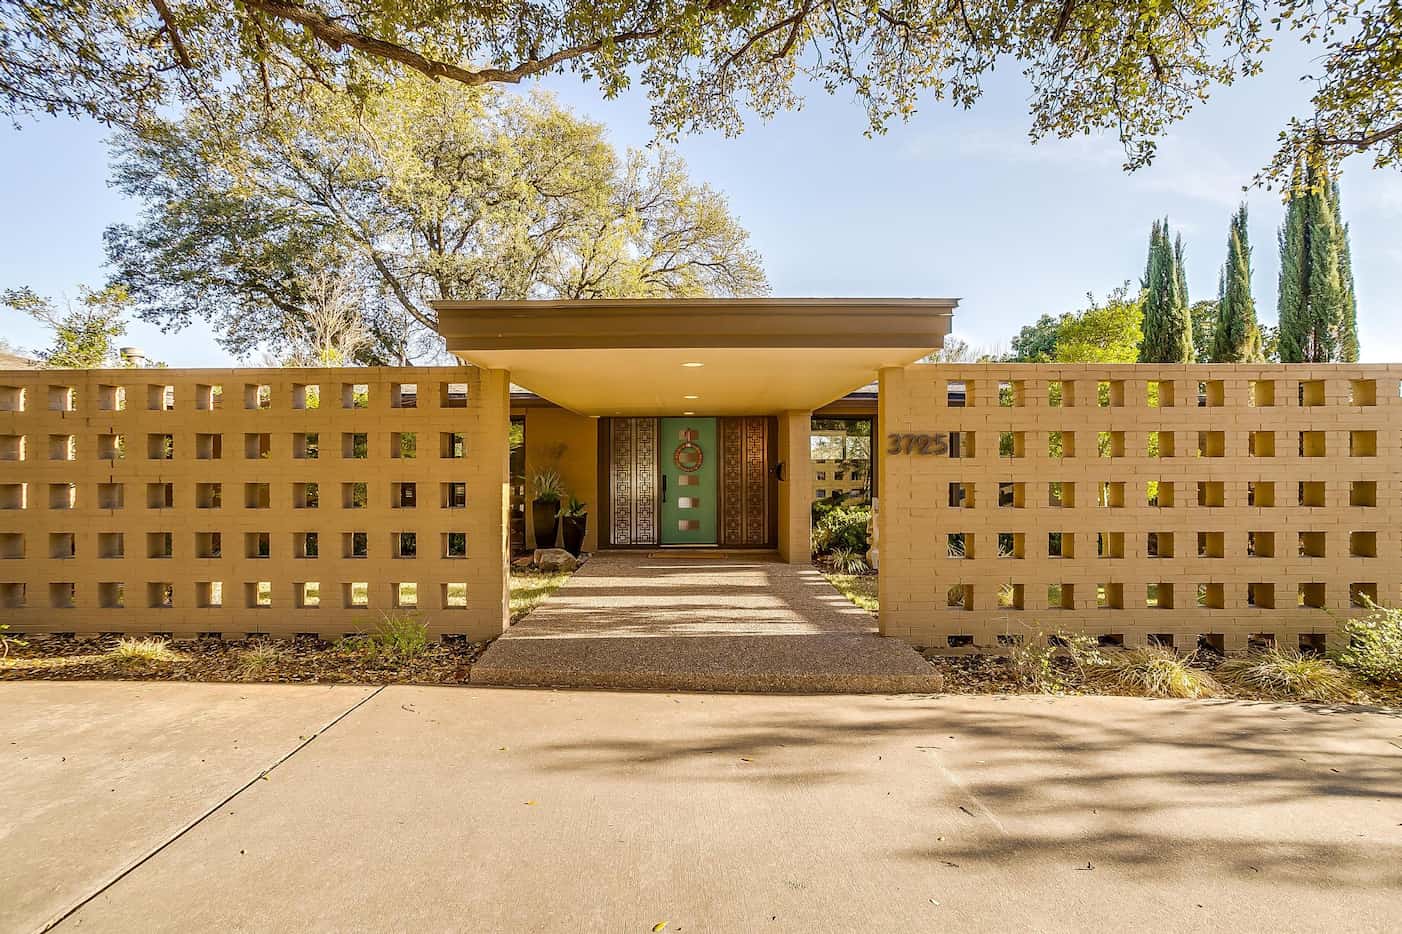 Built in 1957, the midcentury home in Overton Park sits on a sprawling lot with mature trees.